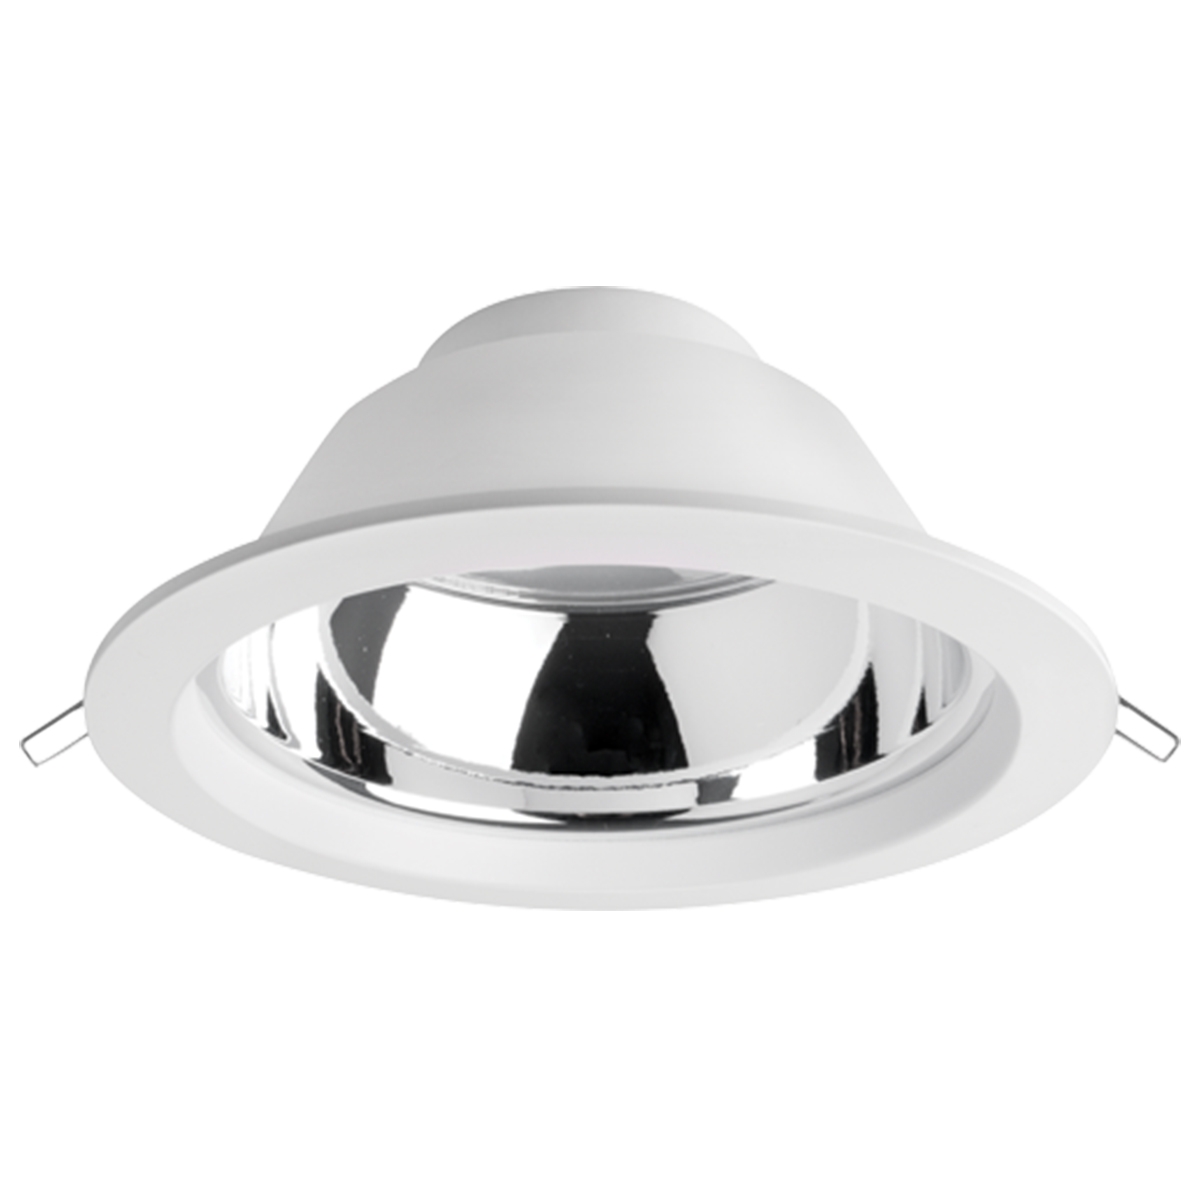 Megaman Recessed Integrated LED Downlight F54300RC 19W 6500K - Daylight